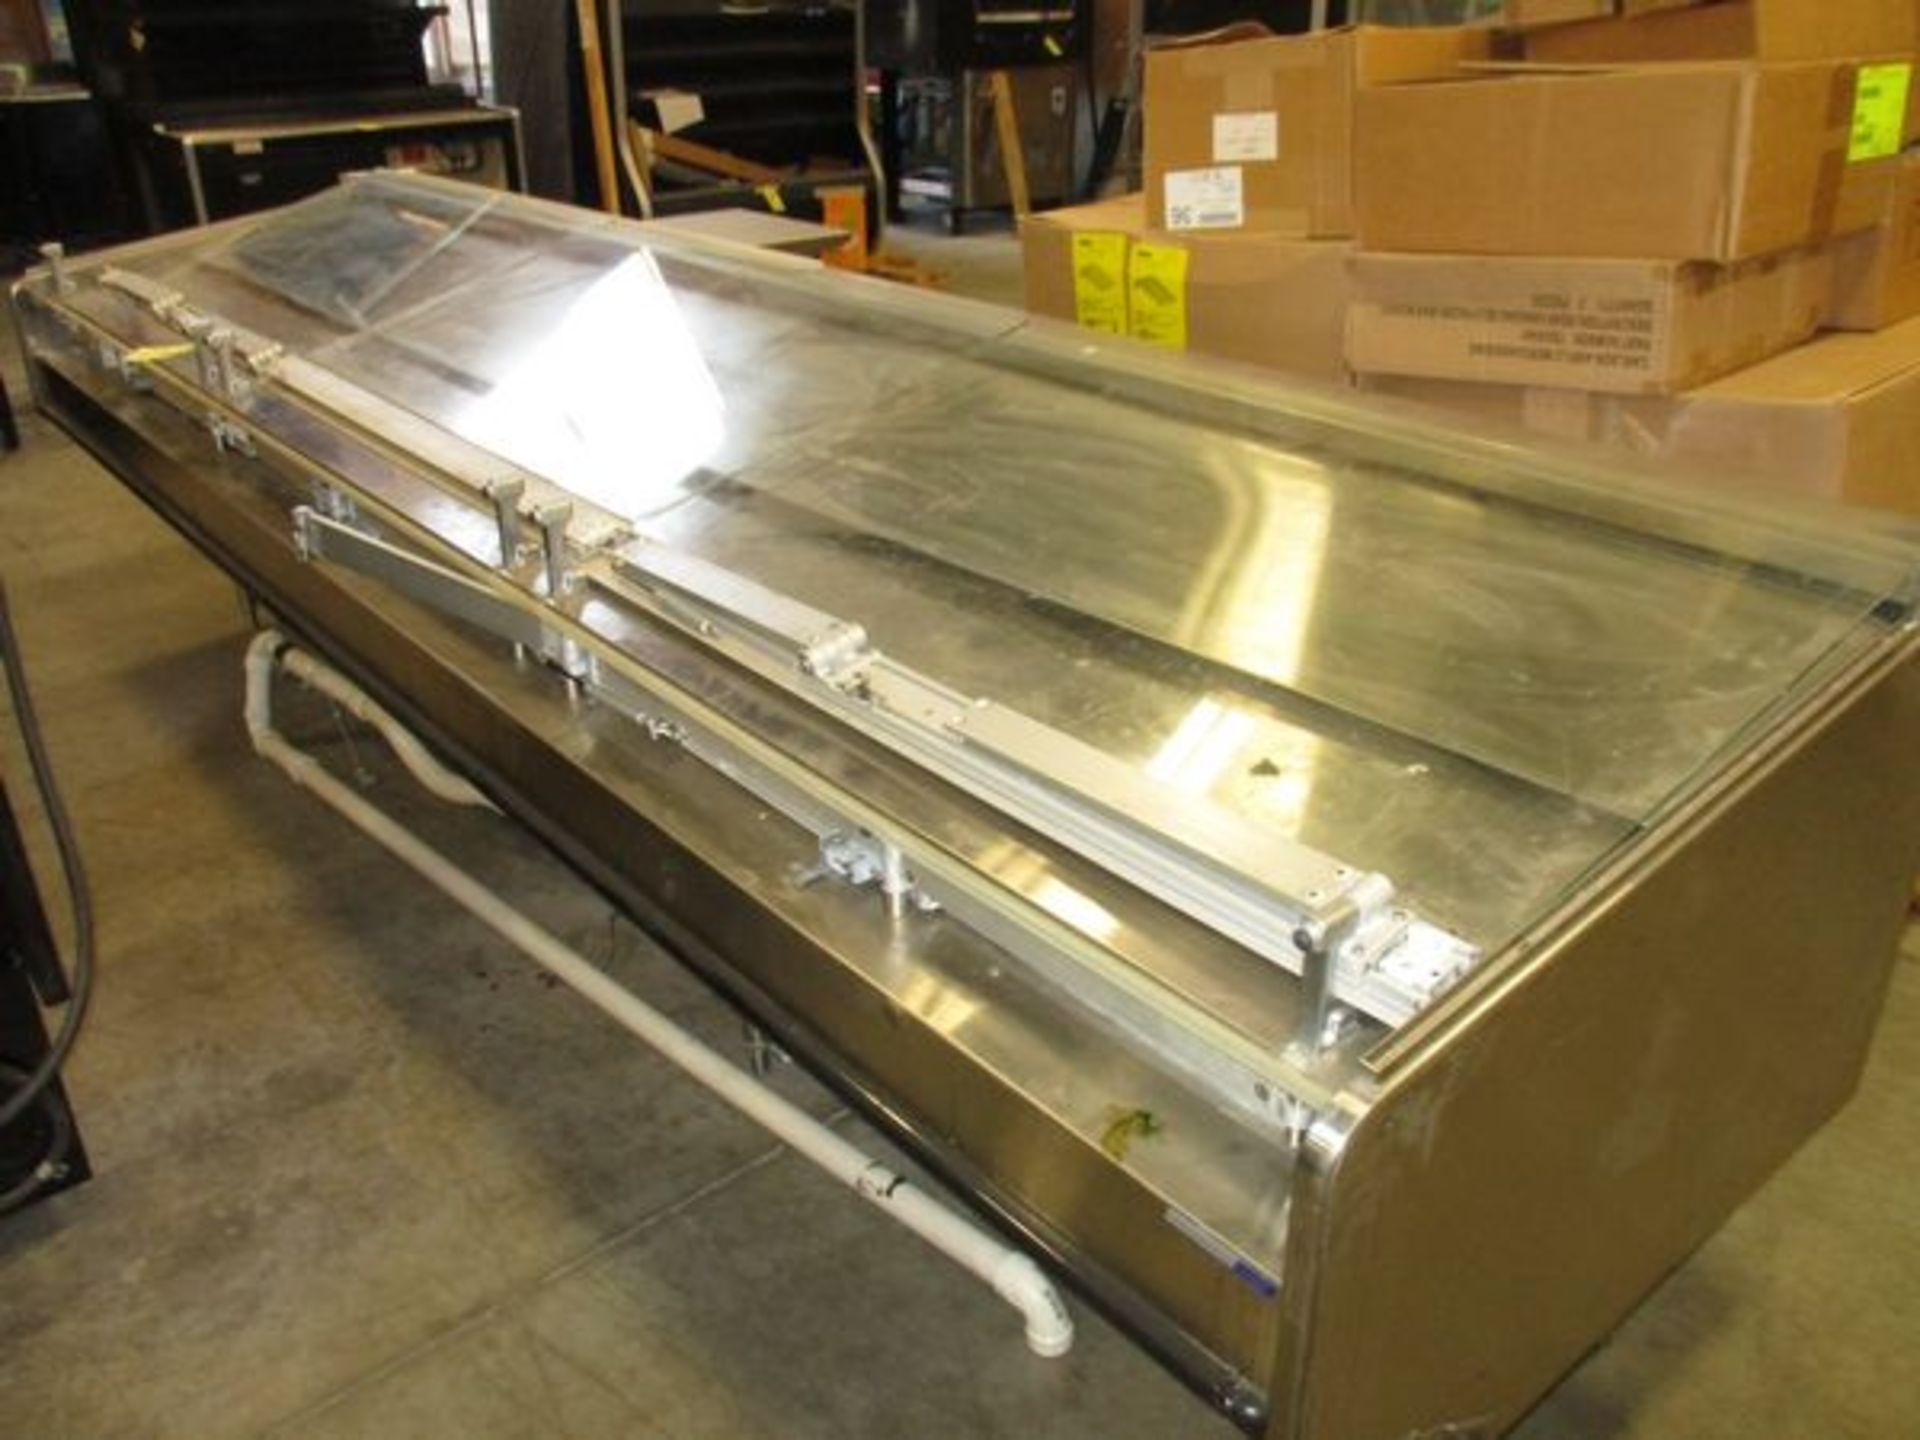 2015 Hillphoenix 196887BSDSW12RGC 12' Iced Seafood Counter (Asset Located in Middleboro, MA) - Image 2 of 2